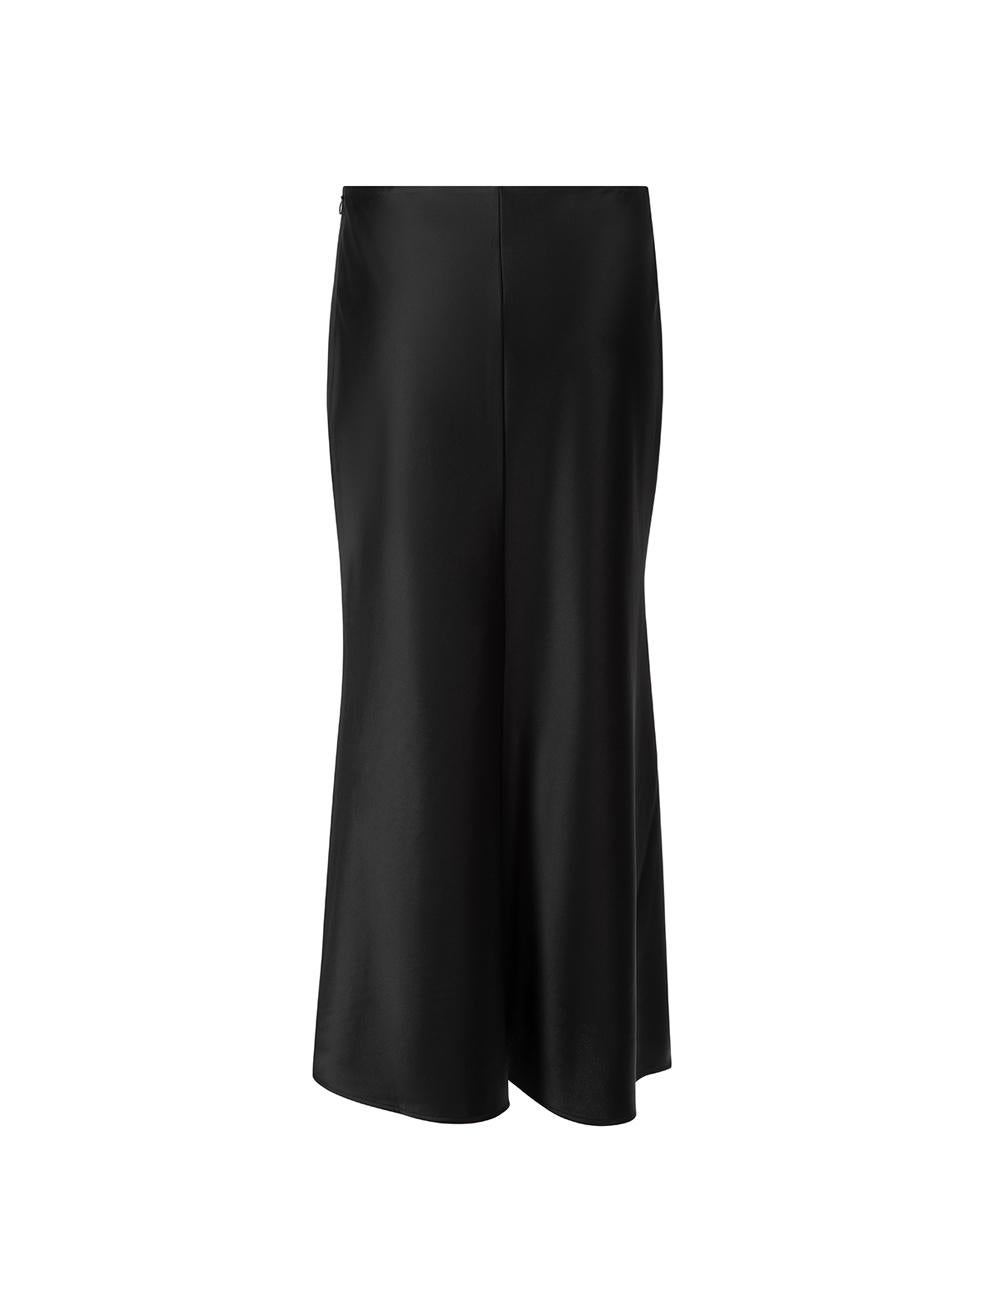 CONDITION is Very good. Hardly any visible wear to skirt is evident on this used Totême designer resale item. Details Black Synthetic Midi slip skirt Satin like material Side zip closure with hook and eye Made in China Composition 71% Triacetate and